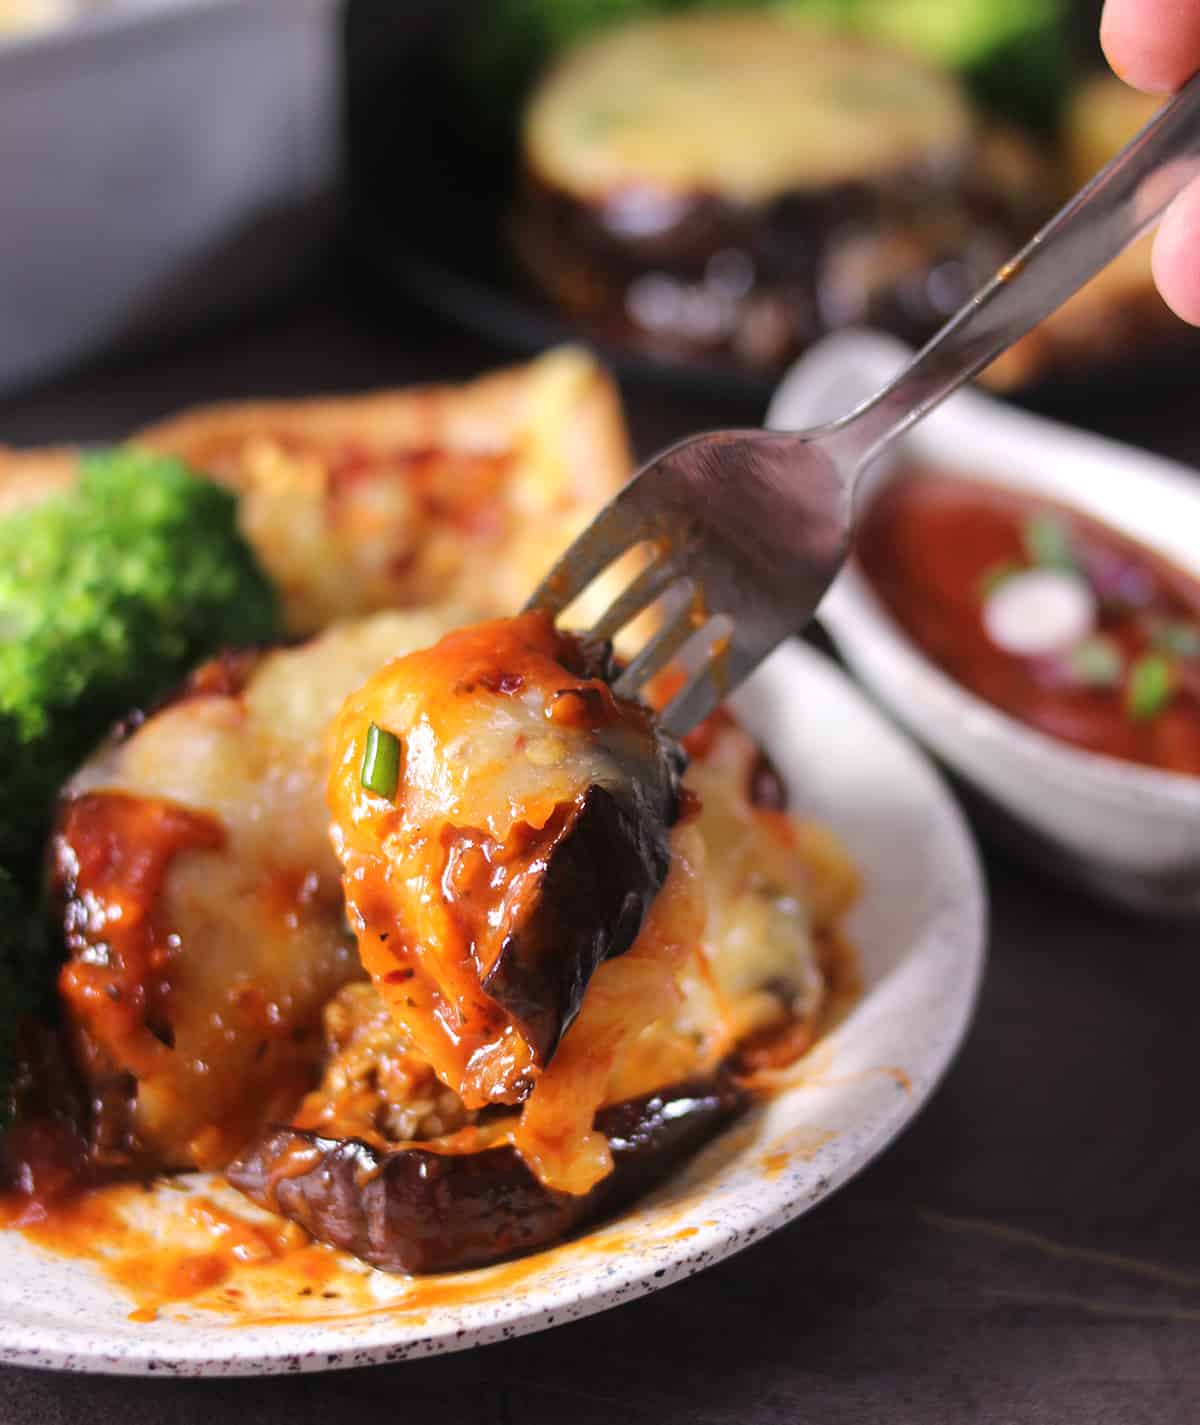 Holding a cheesy eggplant bite in fork